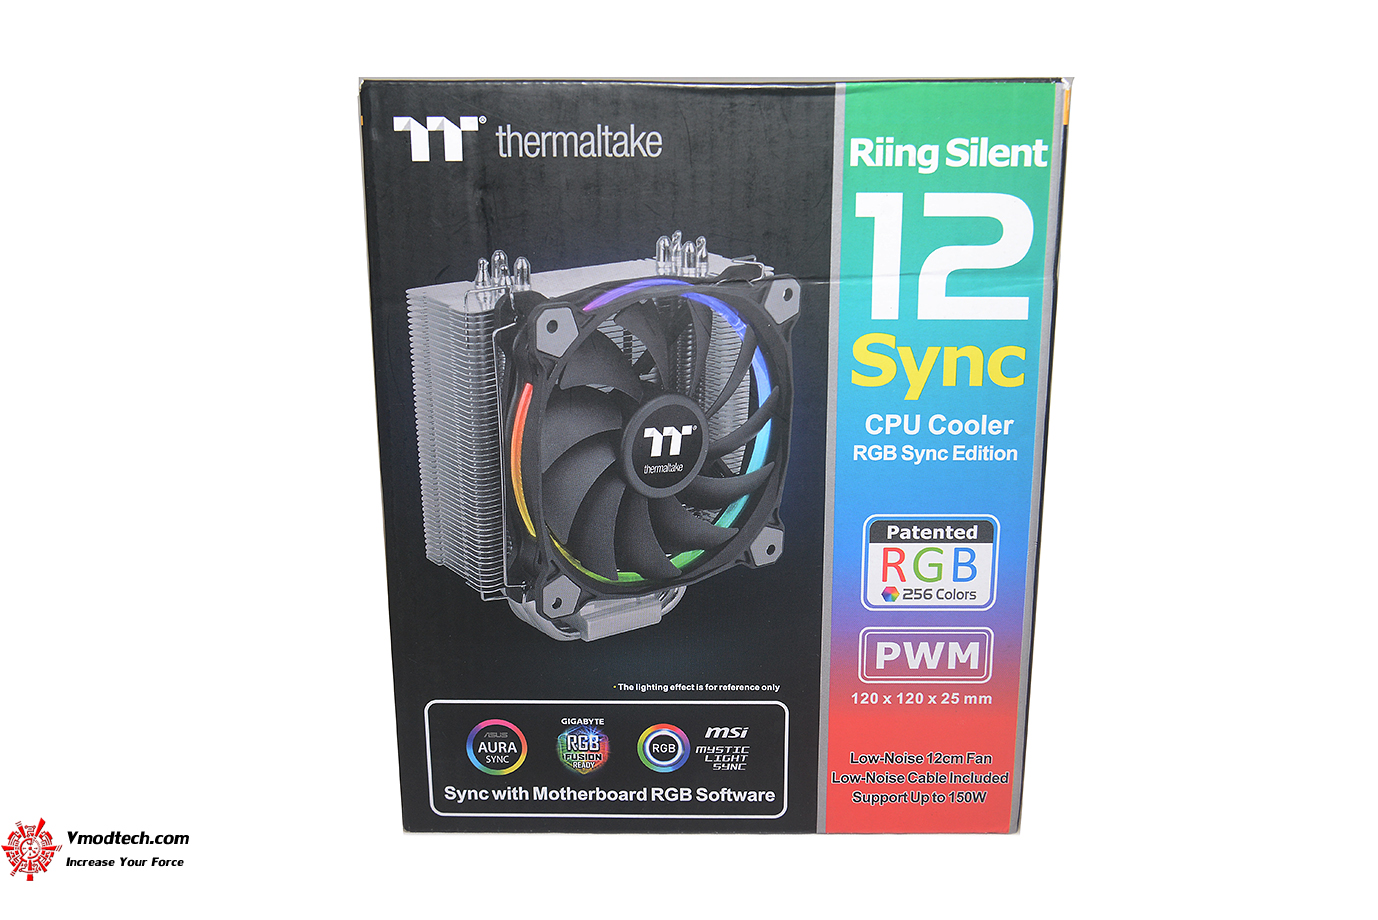 dsc 5209 Thermaltake Riing Silent 12 RGB Sync Edition CPU Cooler Review